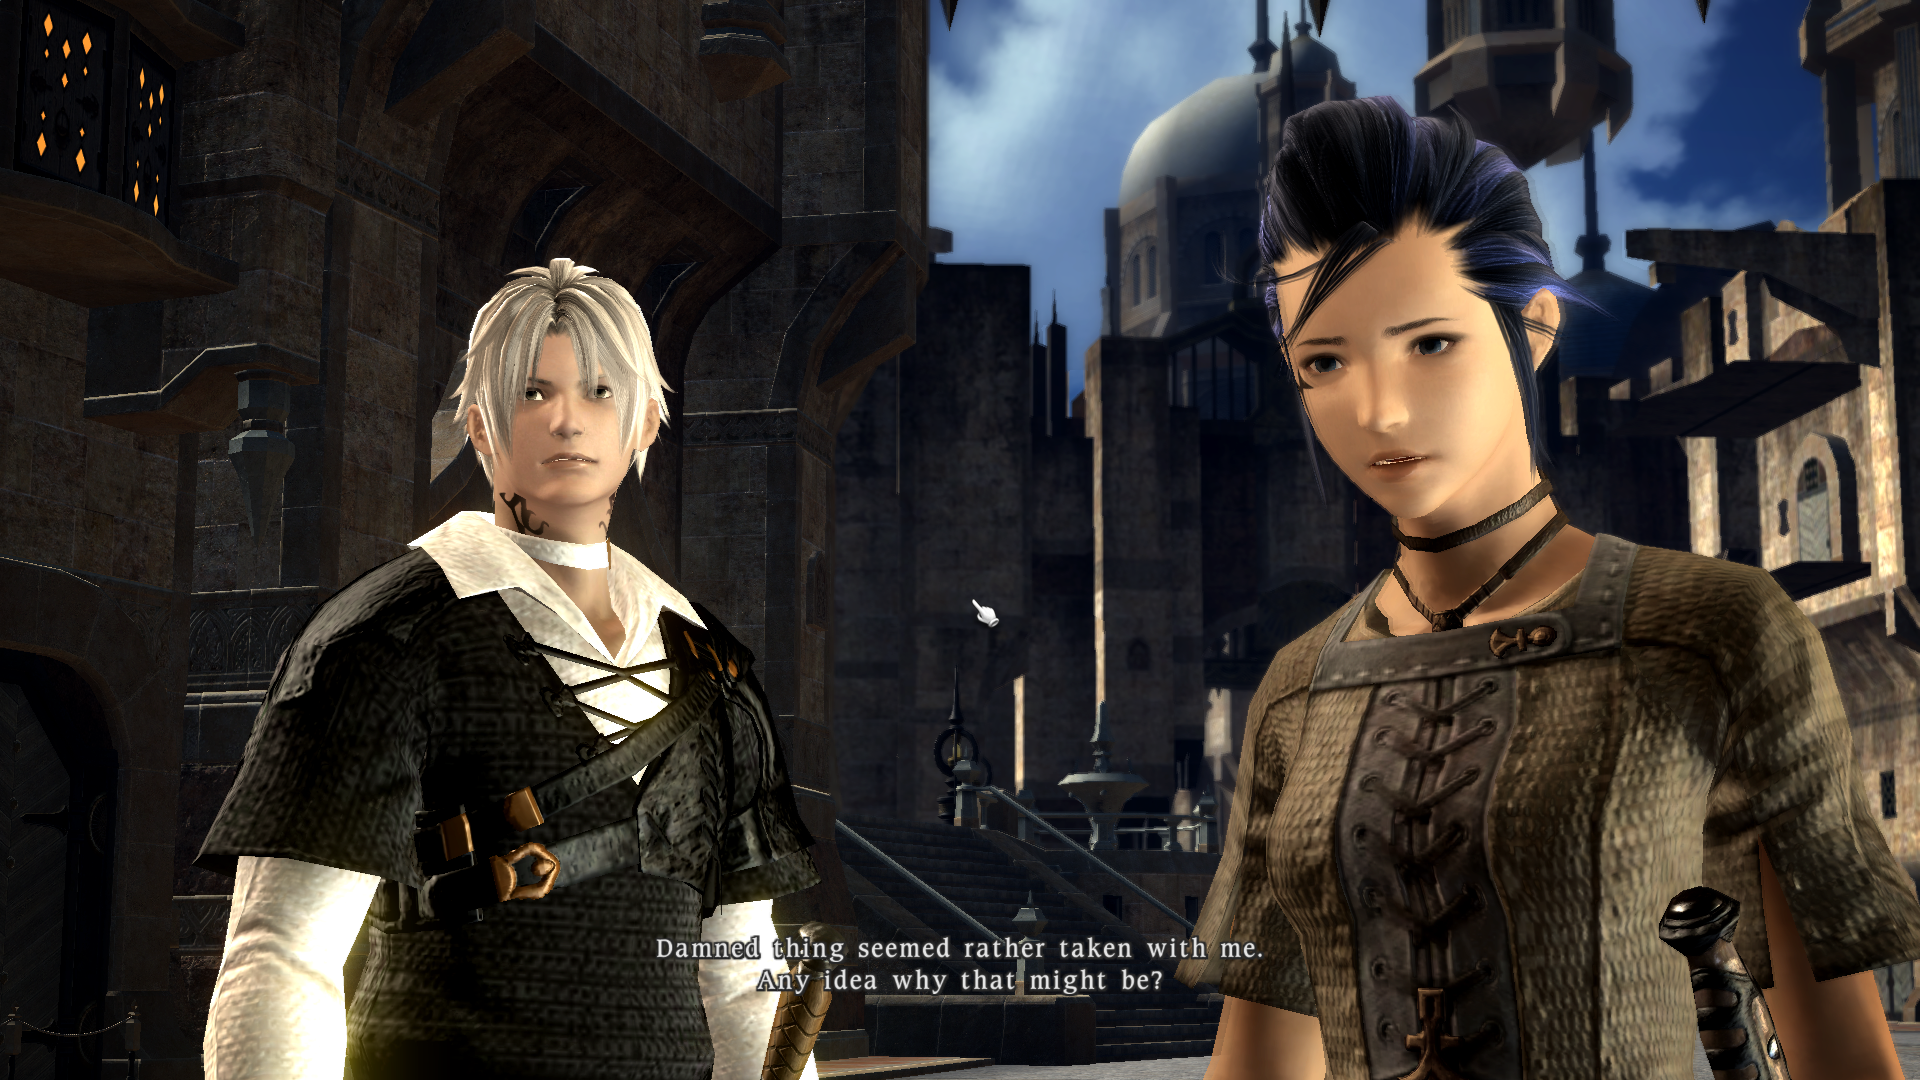 ffxivgame 2010-09-02 13-56-43-53.png